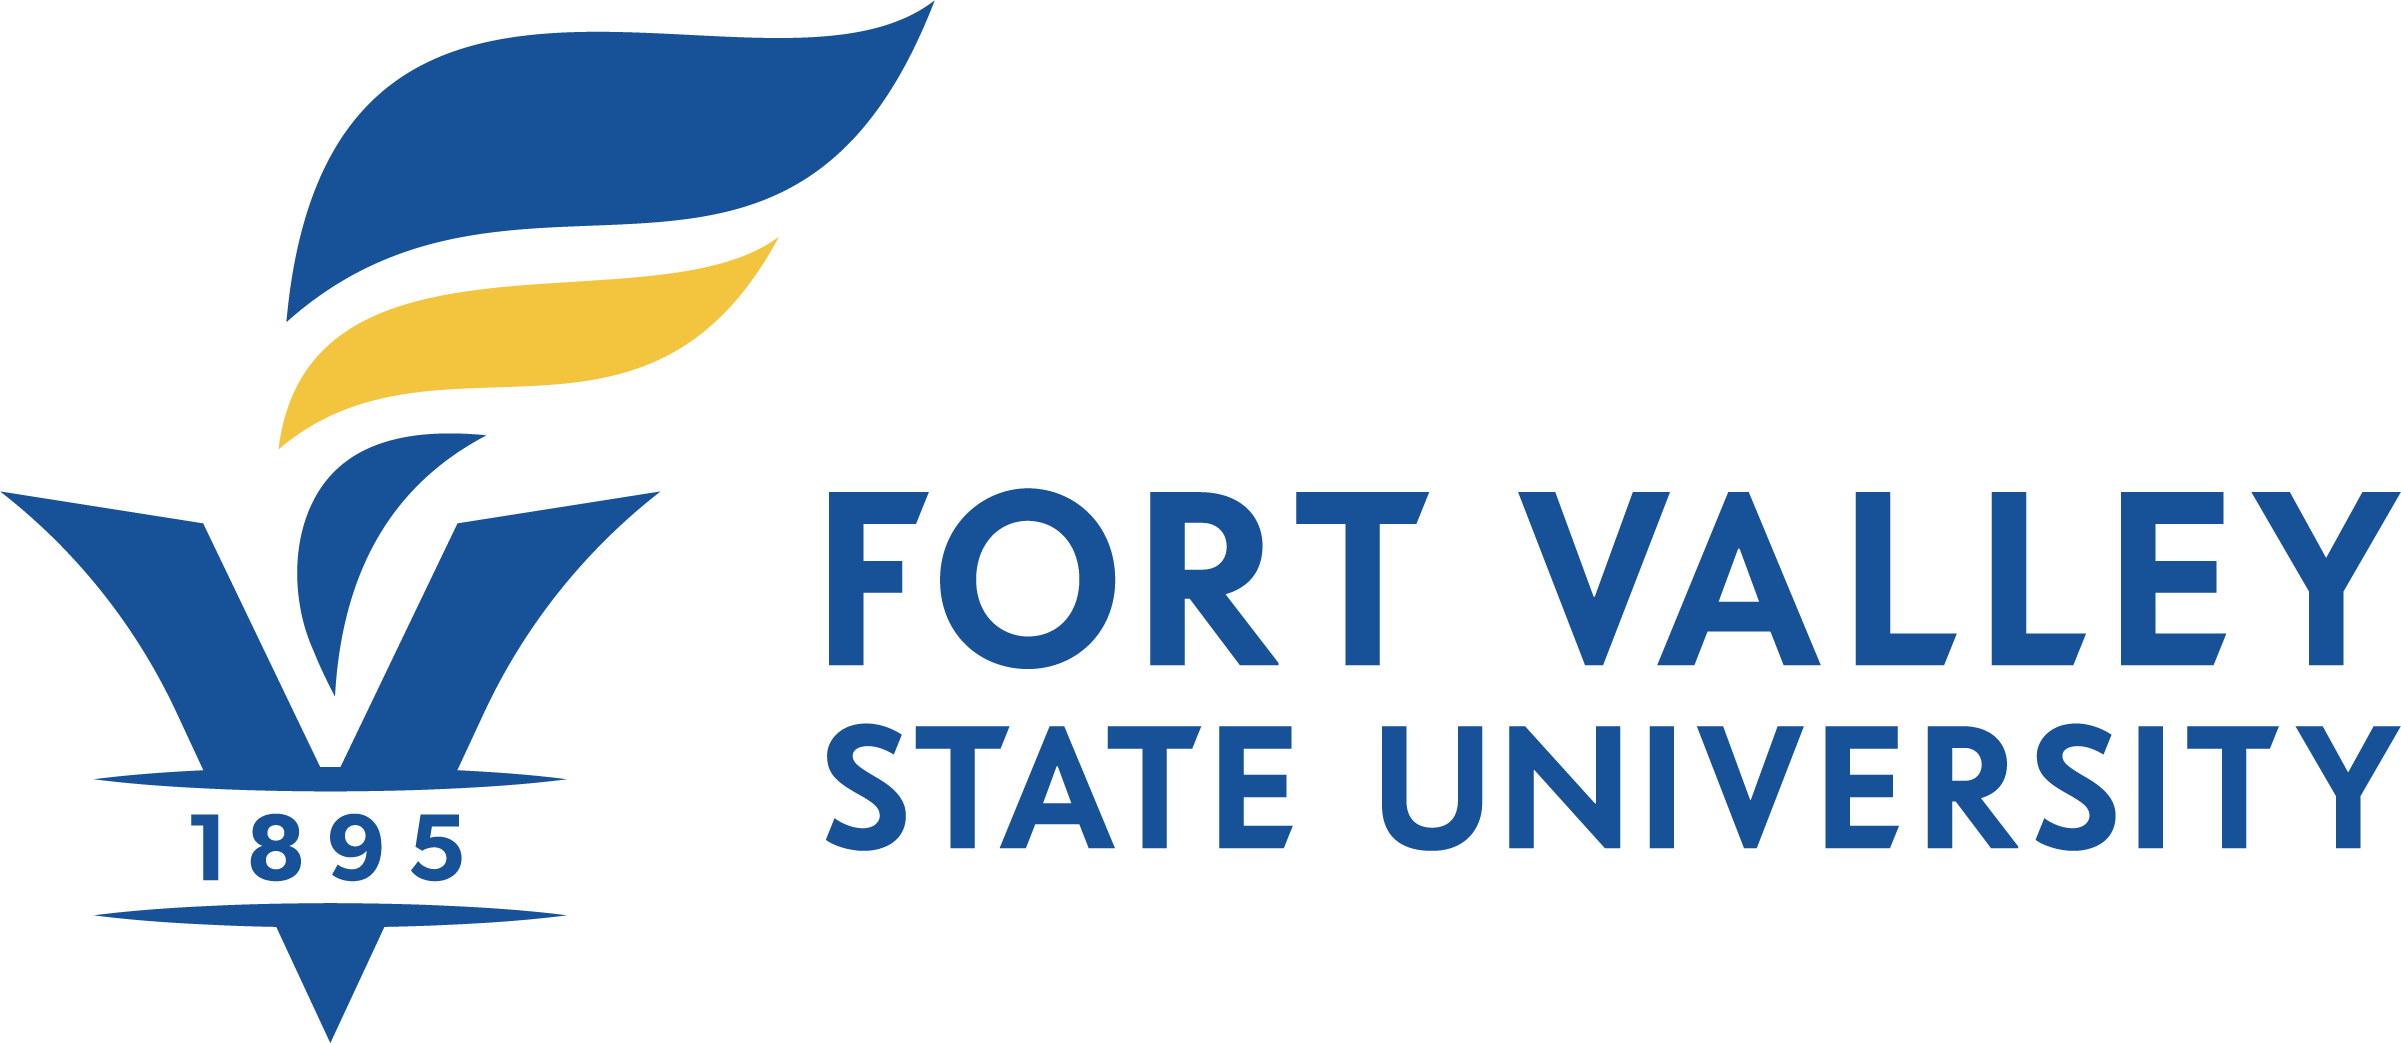 Fort Valley State Un